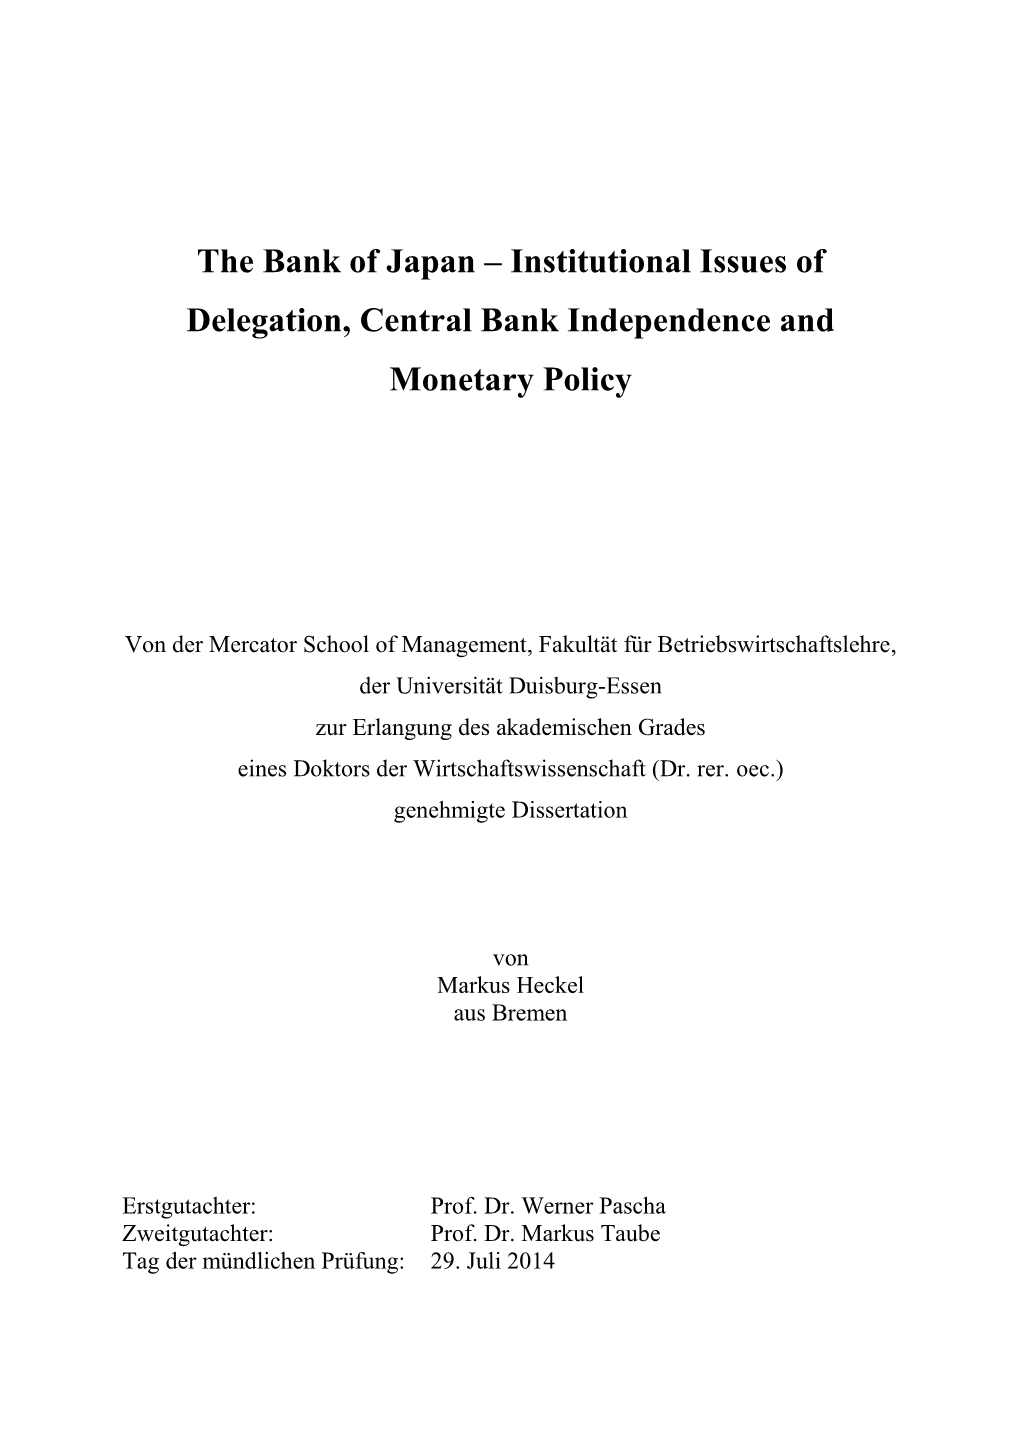 The Bank of Japan – Institutional Issues of Delegation, Central Bank Independence And